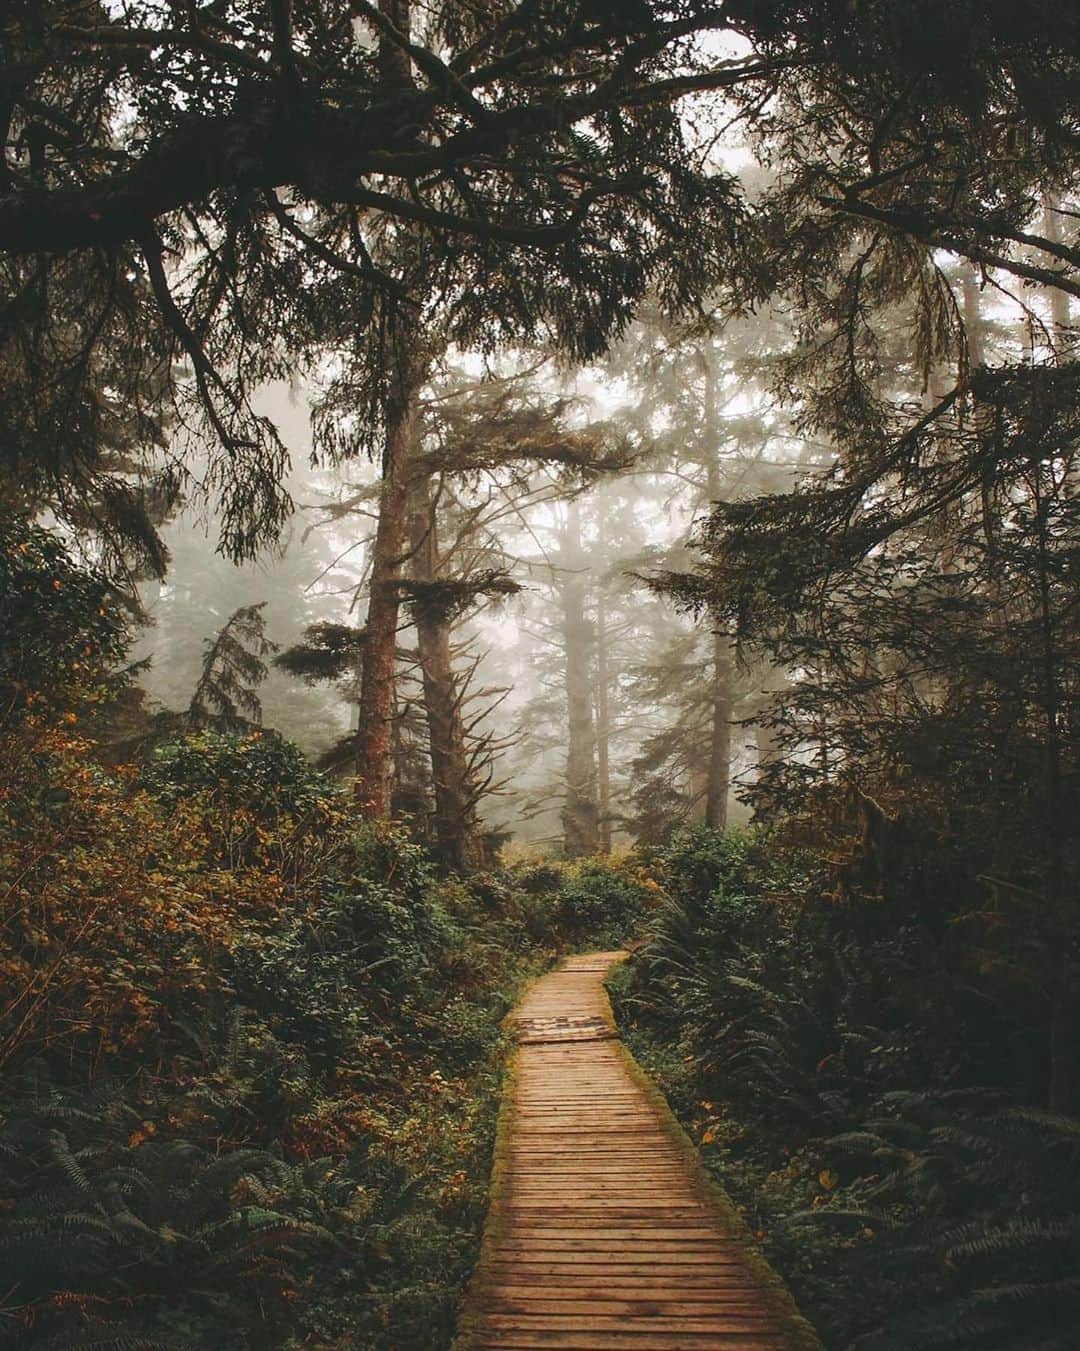 Explore Canadaさんのインスタグラム写真 - (Explore CanadaInstagram)「Today’s #CanadaSpotlight is on @tourismvancouverisland!⁠⠀ ⁠⠀ We’re sharing the love for Vancouver Island today. Here are a few of our favourite facts about this beautiful spot in British Columbia:⁠⠀ ⁠⠀⁠⠀ 🧡 It might be small compared to the mainland of Canada, but Vancouver Island is actually almost a quarter of the size of all of England, meaning there’s plenty to explore - from the great outdoors to vibrant city life.⁠⠀ 💜 Tofino and Ucluelet offer some of the best surfing spots in the Northwest. Whether you’re new to the sport or a surfing pro, year-round surfing awaits you here.⁠⠀ 💚 Vancouver Island is a true foodie’s dream. With everything from cideries to local restaurants that focus on seasonal and sustainable dishes, you’ll be spoiled for choice!⁠⠀ 💛 You can see some incredible wildlife on the island, including grizzly bears, whales, dolphins and more.⁠⠀ ⁠⠀ Have you visited Vancouver Island before? For more epic photos and videos, food and drink recommendations and updates, check out @tourismvancouverisland! ⁠⠀ ⁠⠀ #ExploreCanada #ForGlowingHearts⁠⠀ ⁠⠀ 📷: ⁠⠀ ⁠⠀ 1. @karlykrobathphoto⁠⠀ 2. @stephaniadeline⁠⠀ 3. @blakehobsonn⁠⠀ 4. @vancitywild⁠⠀ 5. @averyswail⁠⠀ 6. @bpfoto.ca⁠⠀ 7&8. @tylermcave⁠⠀ ⁠⠀ 📍: @tourismvancouverisland⁠⠀ ⁠⠀ #ExploreVancouverIsland」8月20日 0時52分 - explorecanada